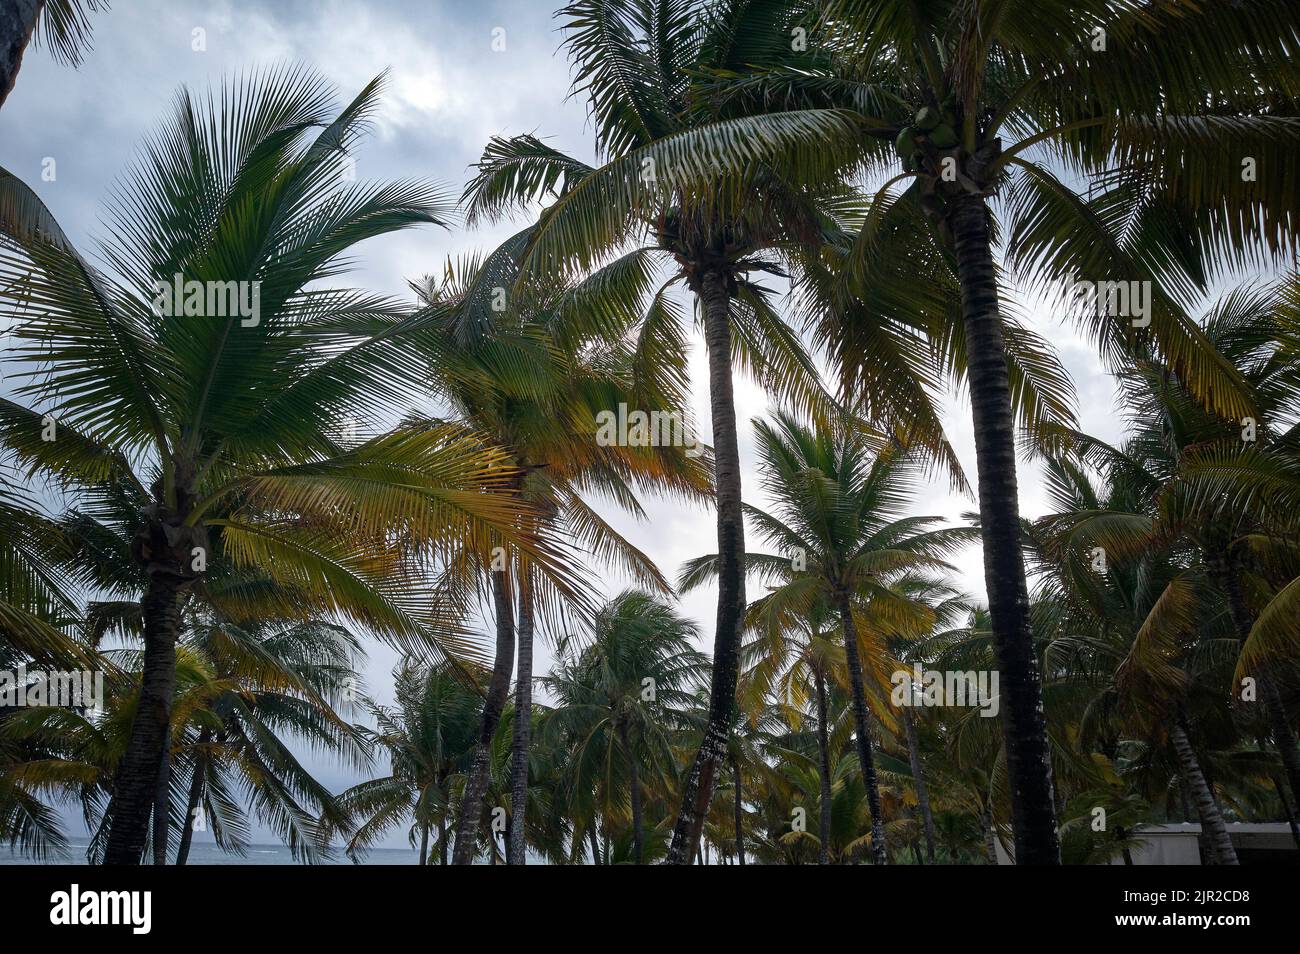 Some palm trees typical of the Mexican Caribbean grow on the beach. grow on the beach. Stock Photo